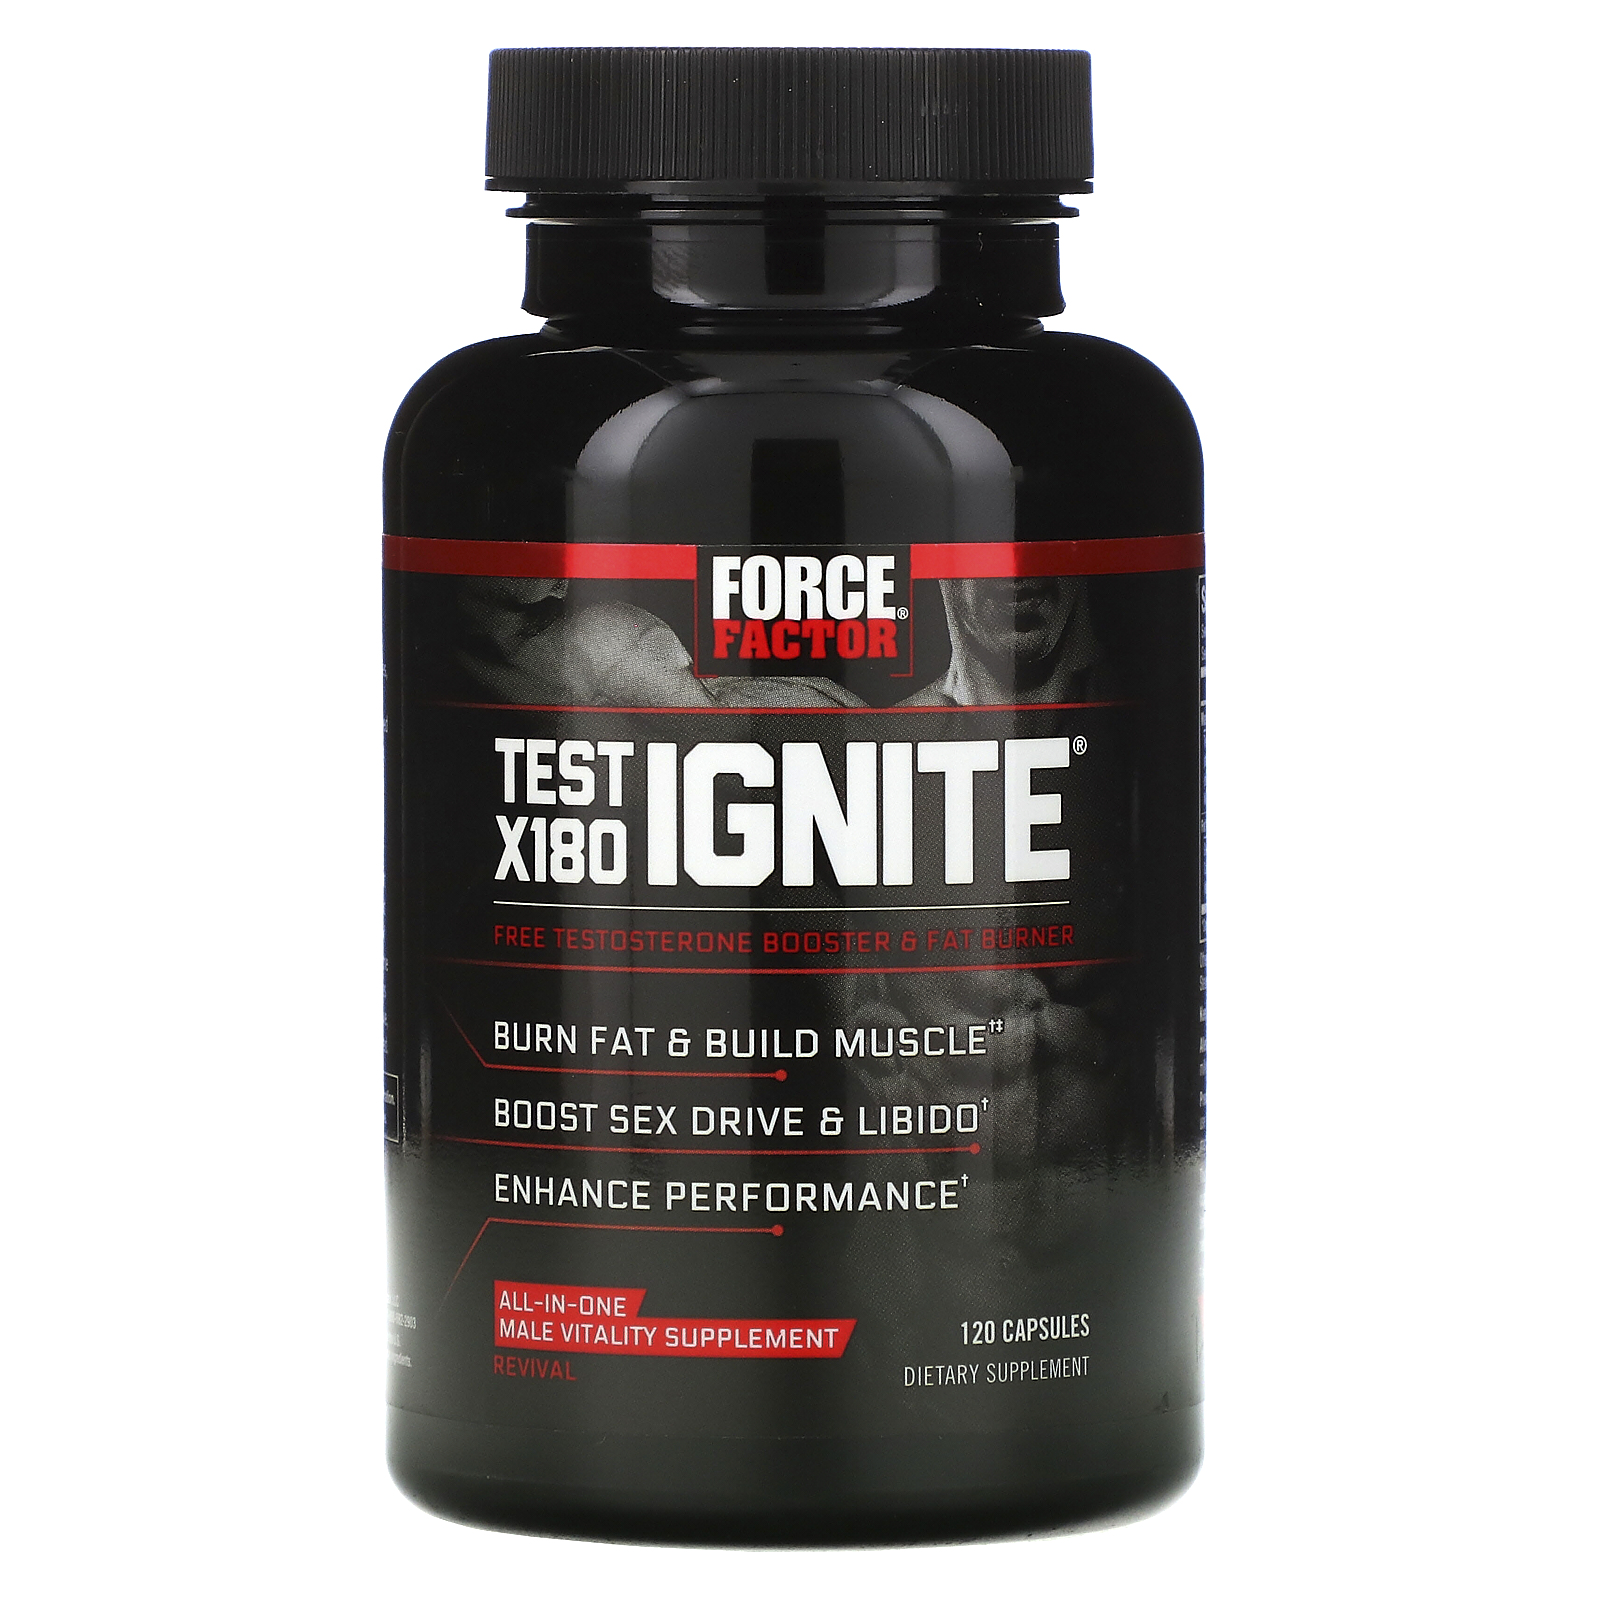 Force Factor, Test X180 Ignite, Free Testosterone Booster &amp; Fat Burner, 120 Capsules